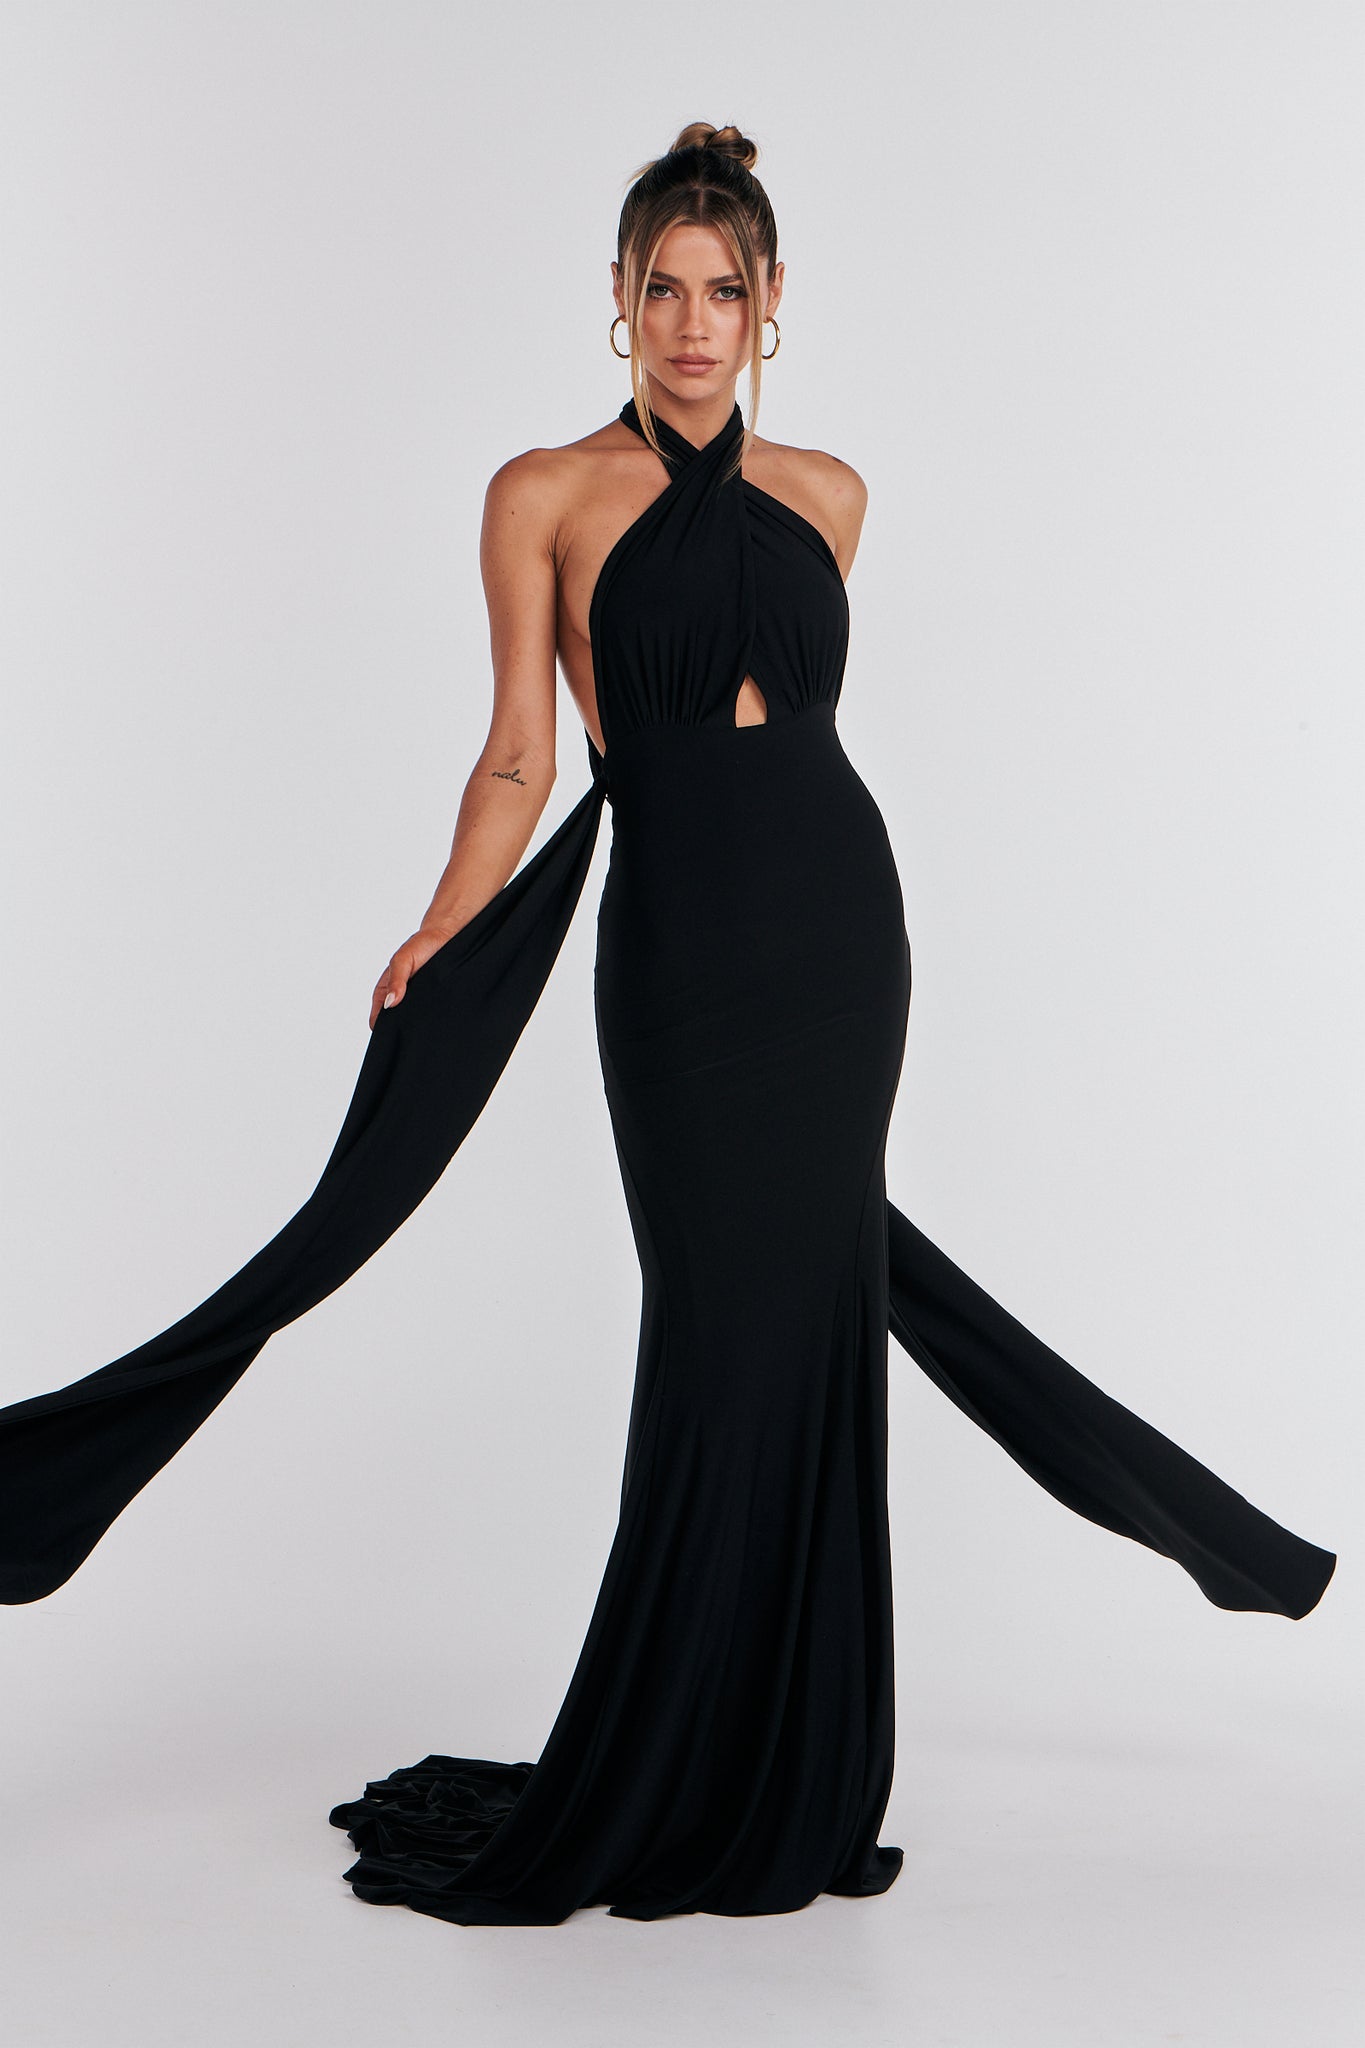 MÉLANI The Label ELIANA Black Multi Tie Backless Bridesmaid Formal Gown